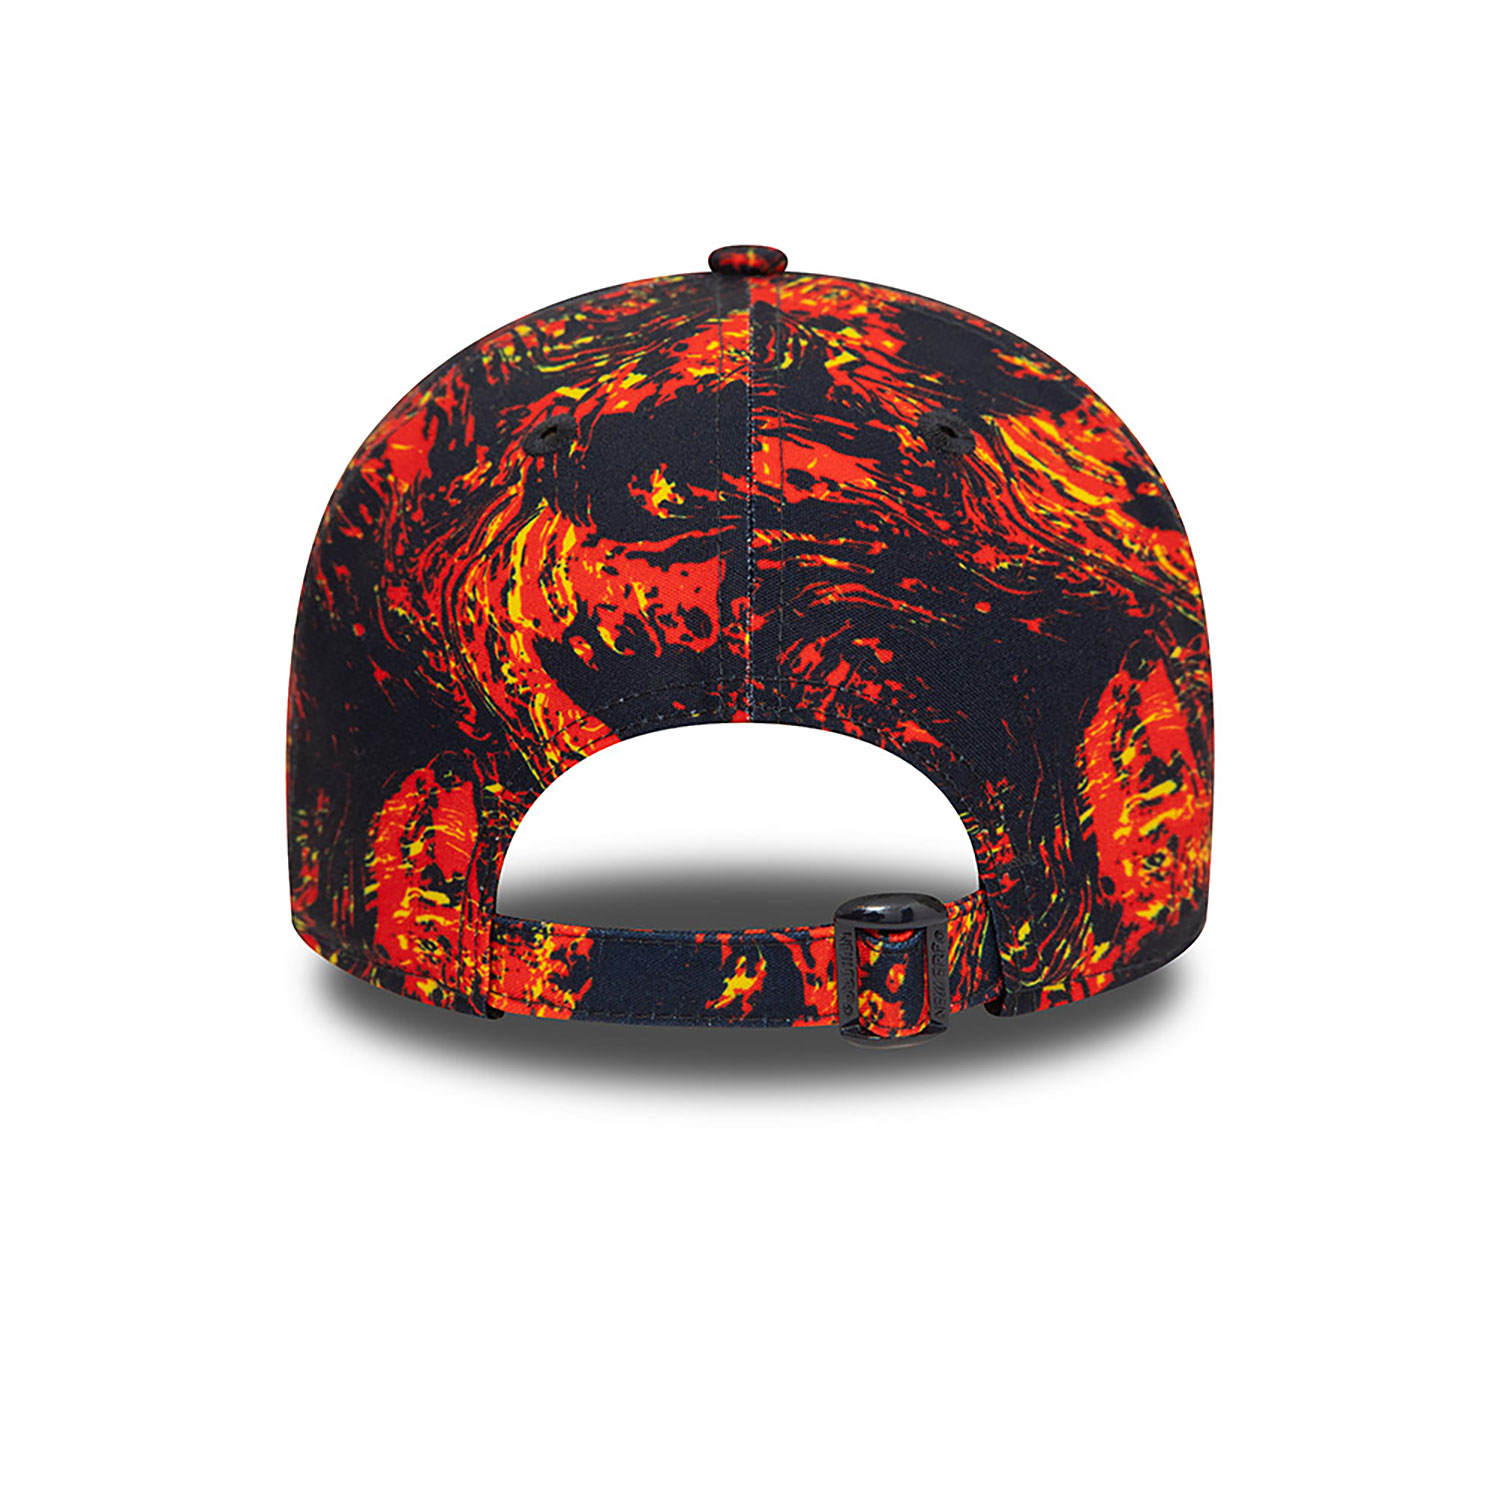 Red Bull Racing All Over Print Navy 9FORTY Adjustable Cap